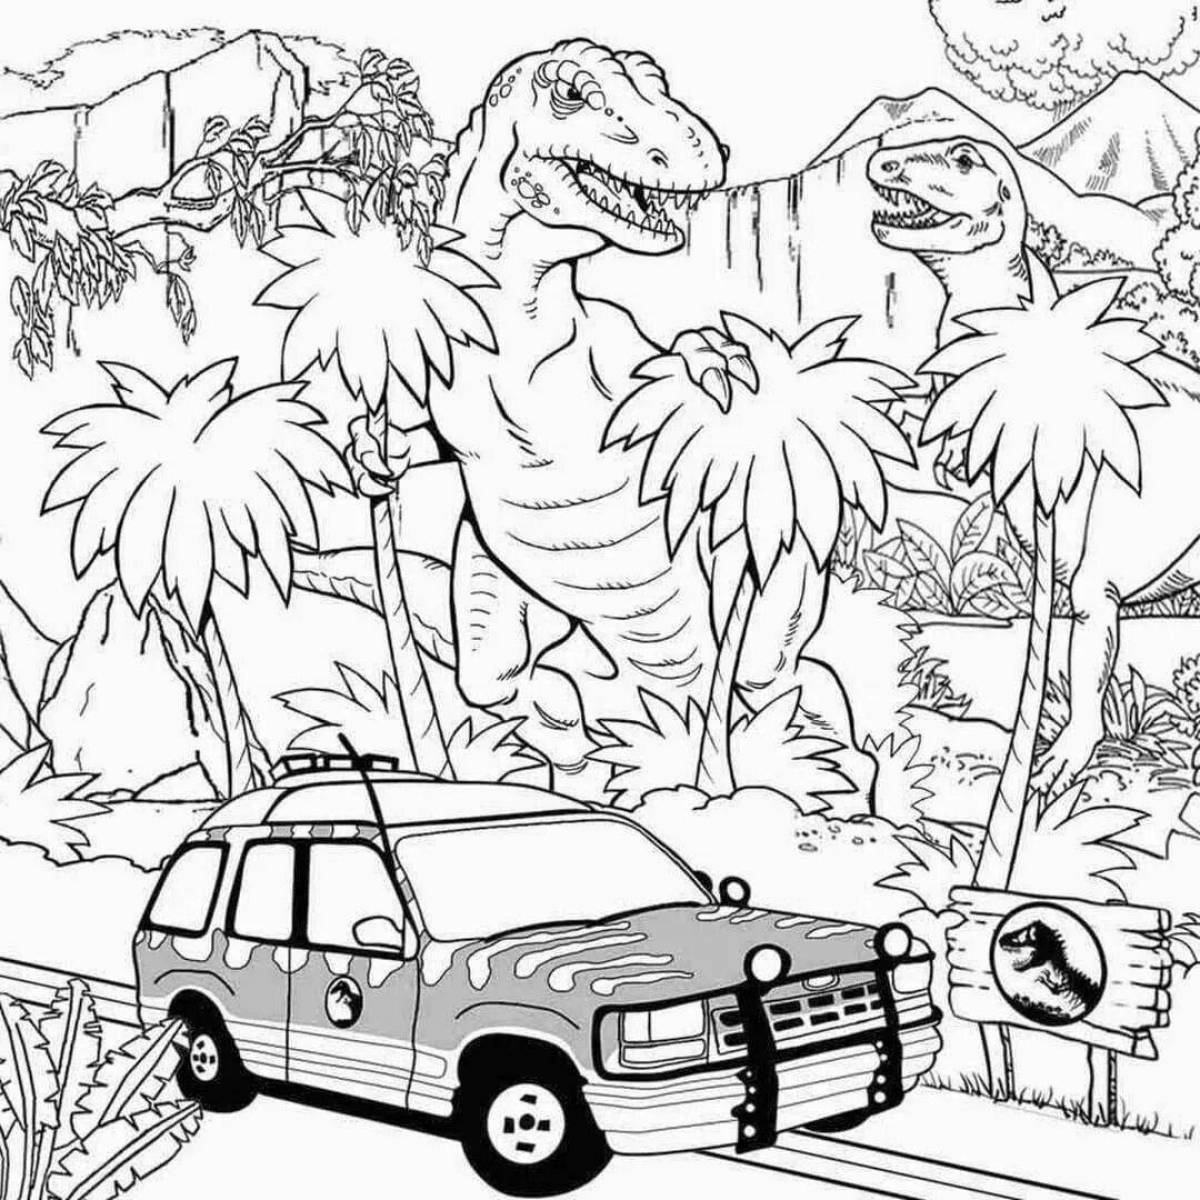 Amazing lego dinosaurs jurassic world coloring pages